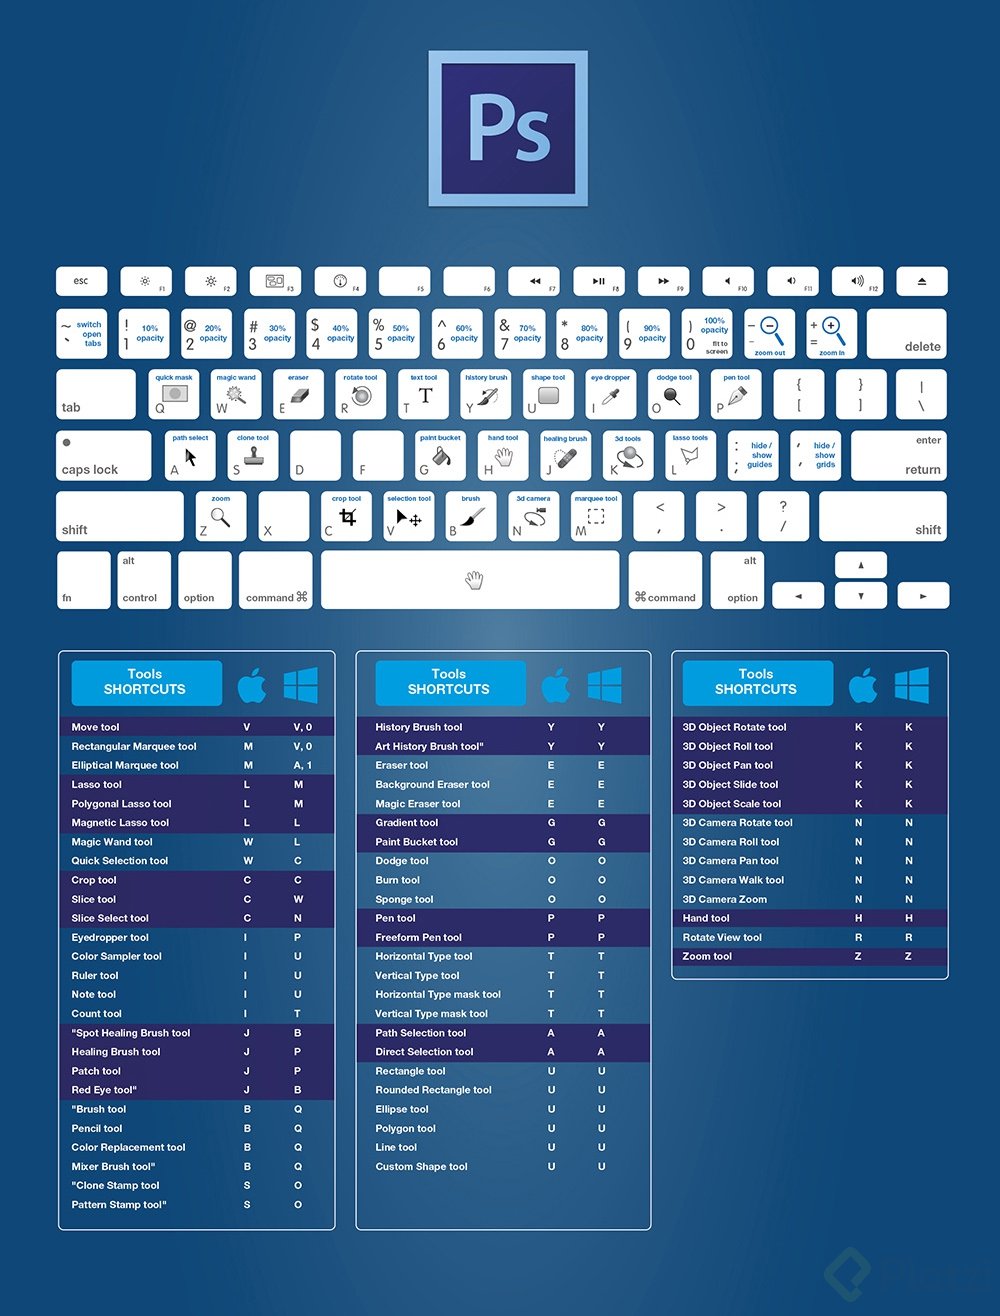 The-Complete-Adobe-Photoshop-CC-Keyboard-Shortcuts-For-Designers-Guide-2015.jpg